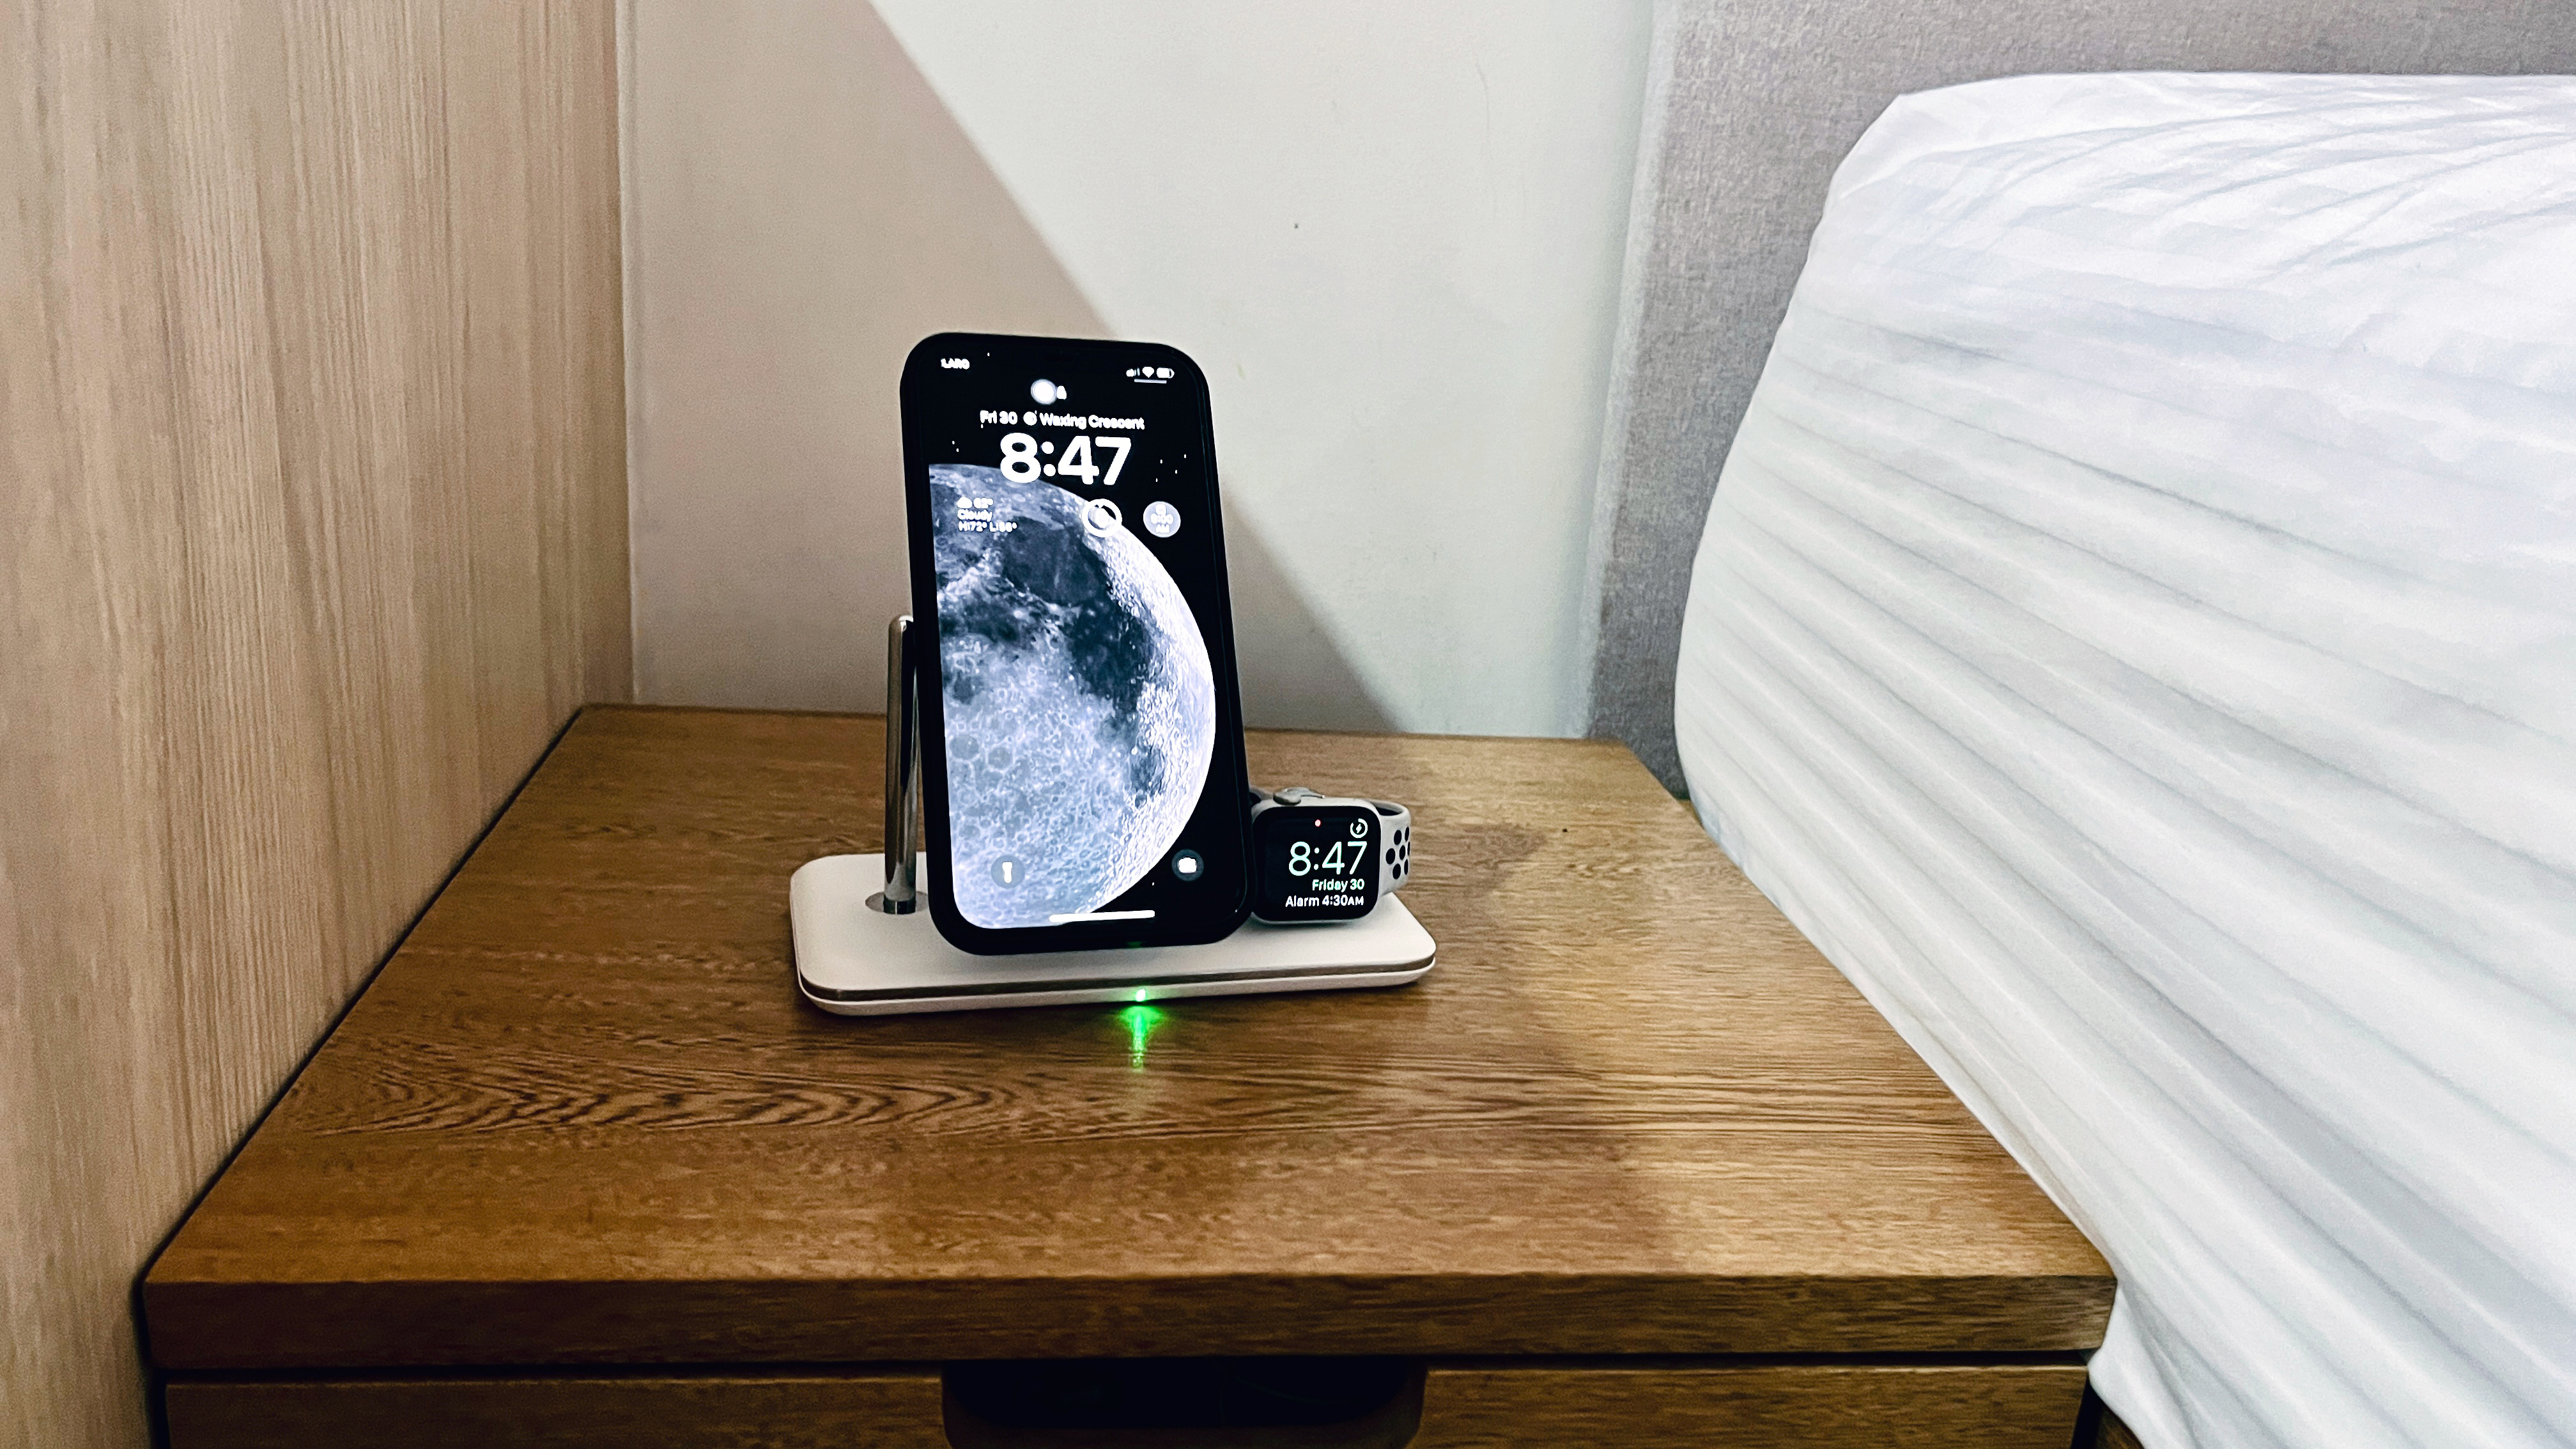 UGREEN 25W 3-in-1 MagSafe Wireless Charging Station – Best Gadget